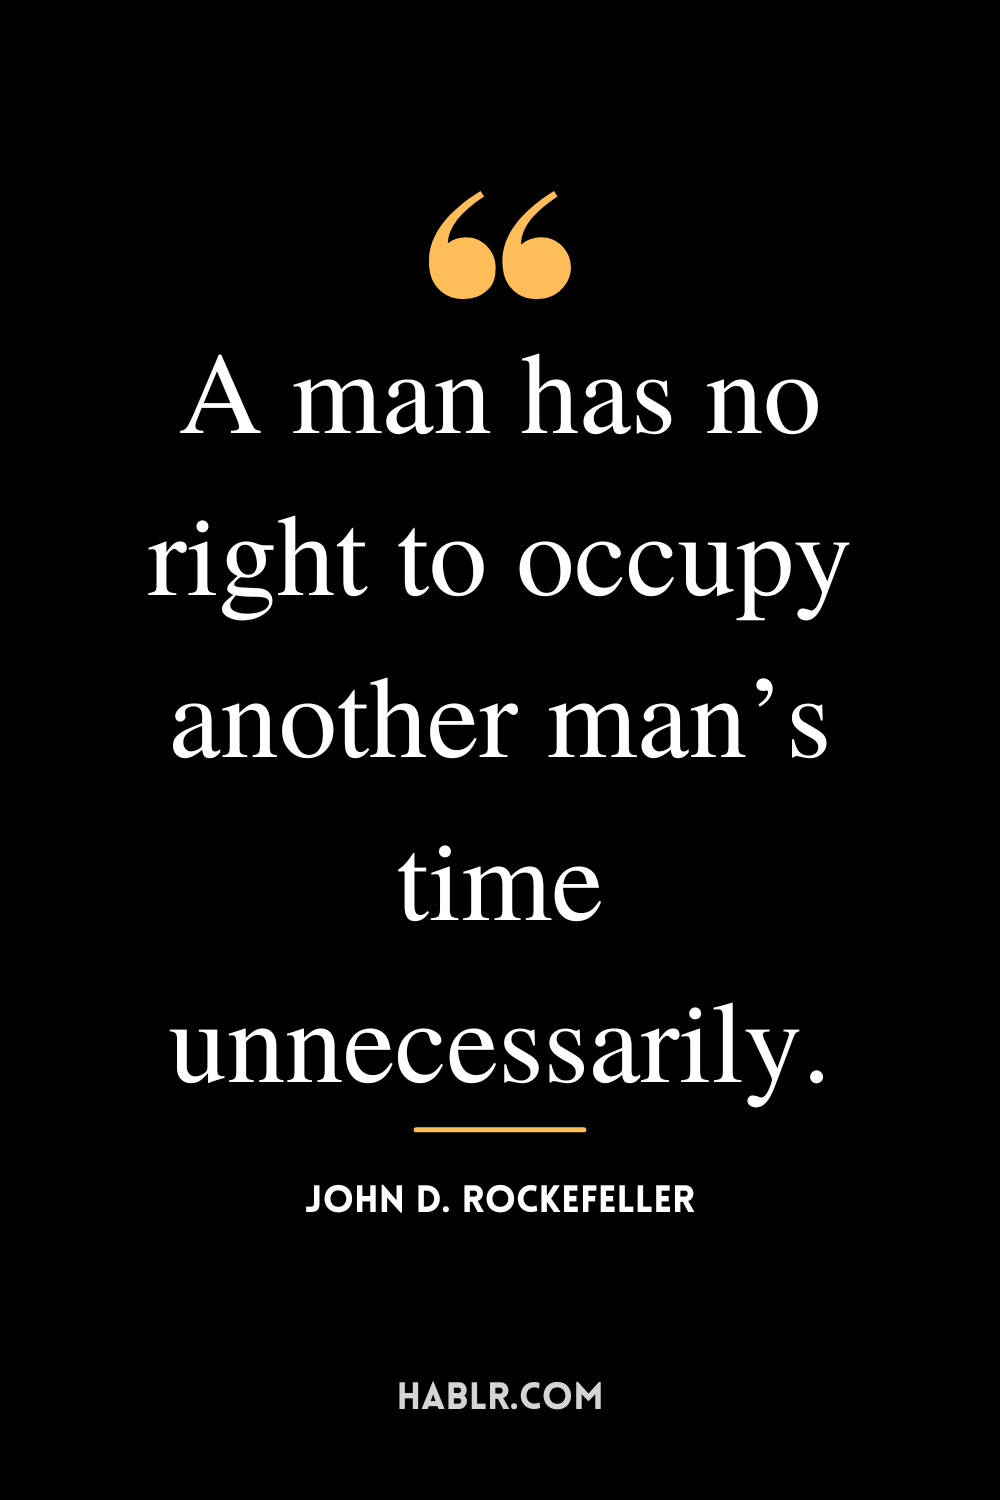 “A man has no right to occupy another man’s time unnecessarily.” -John D. Rockefeller